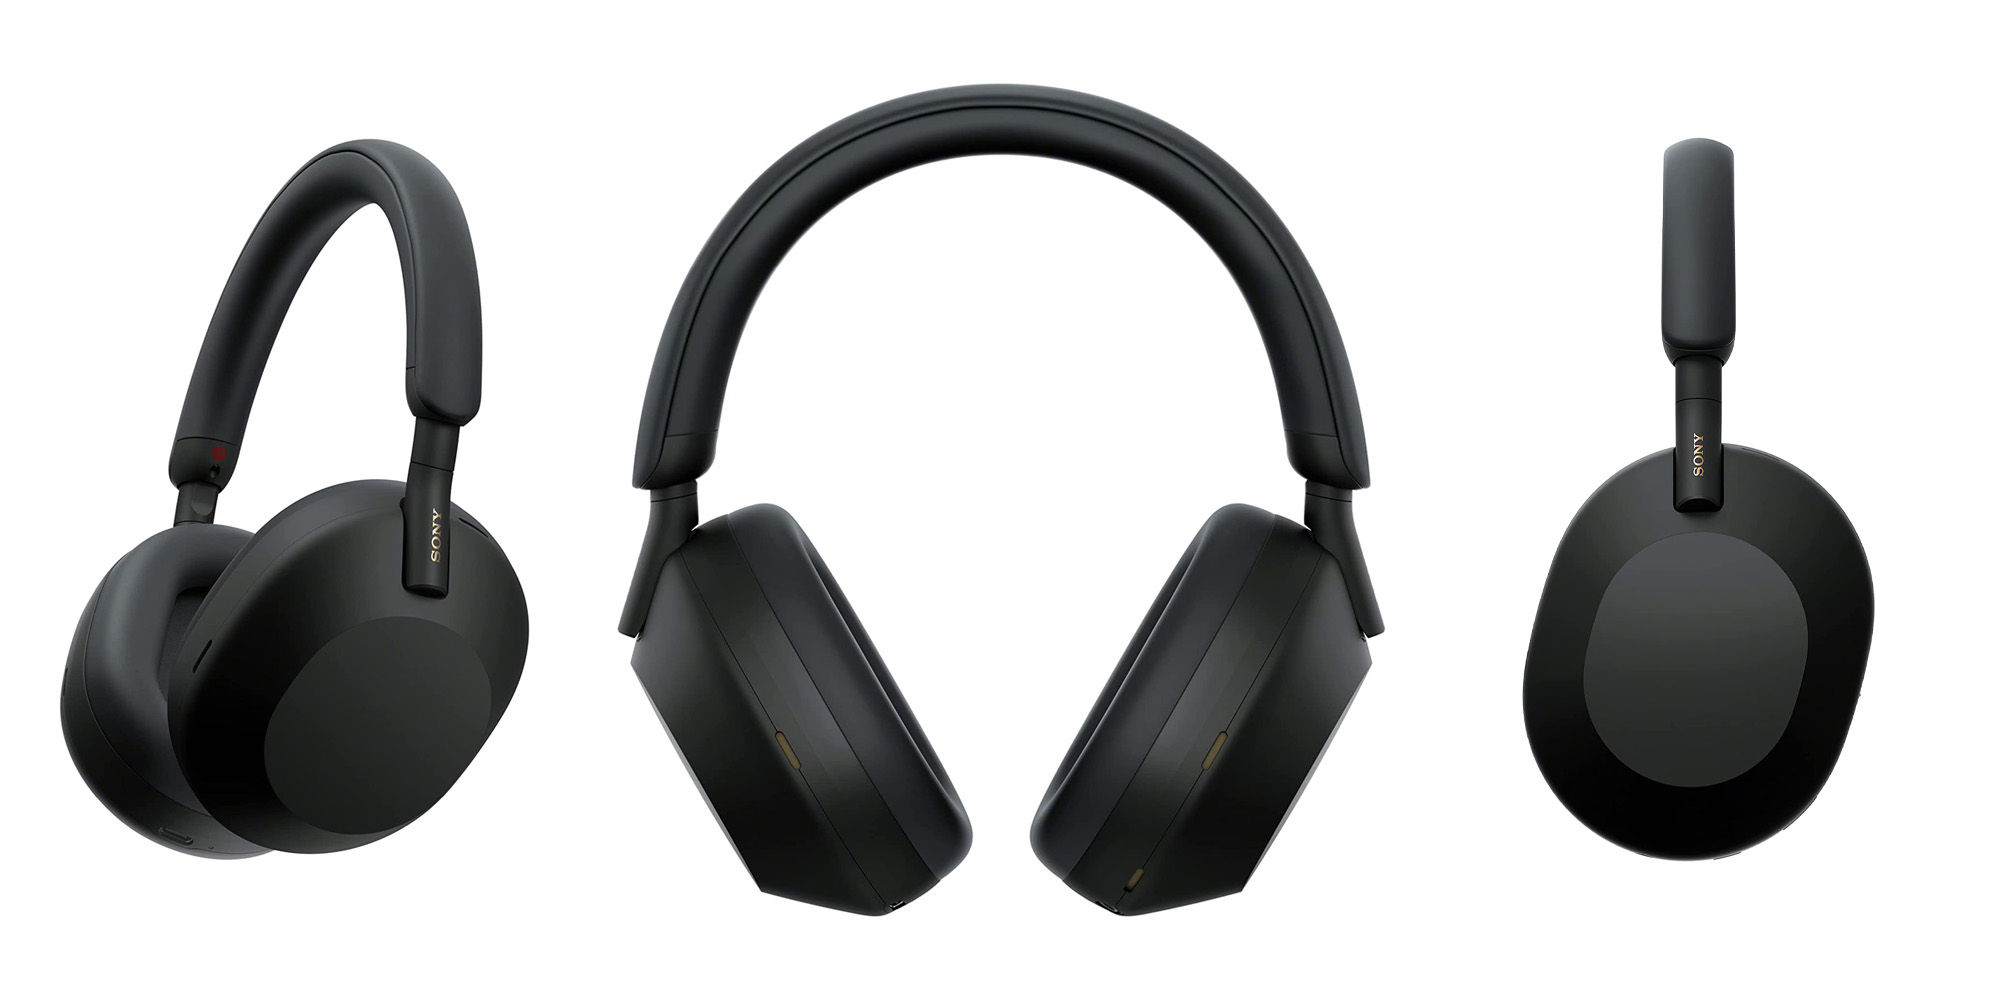 Sony announces the new WH-1000XM5: Here's what's new - 9to5Google